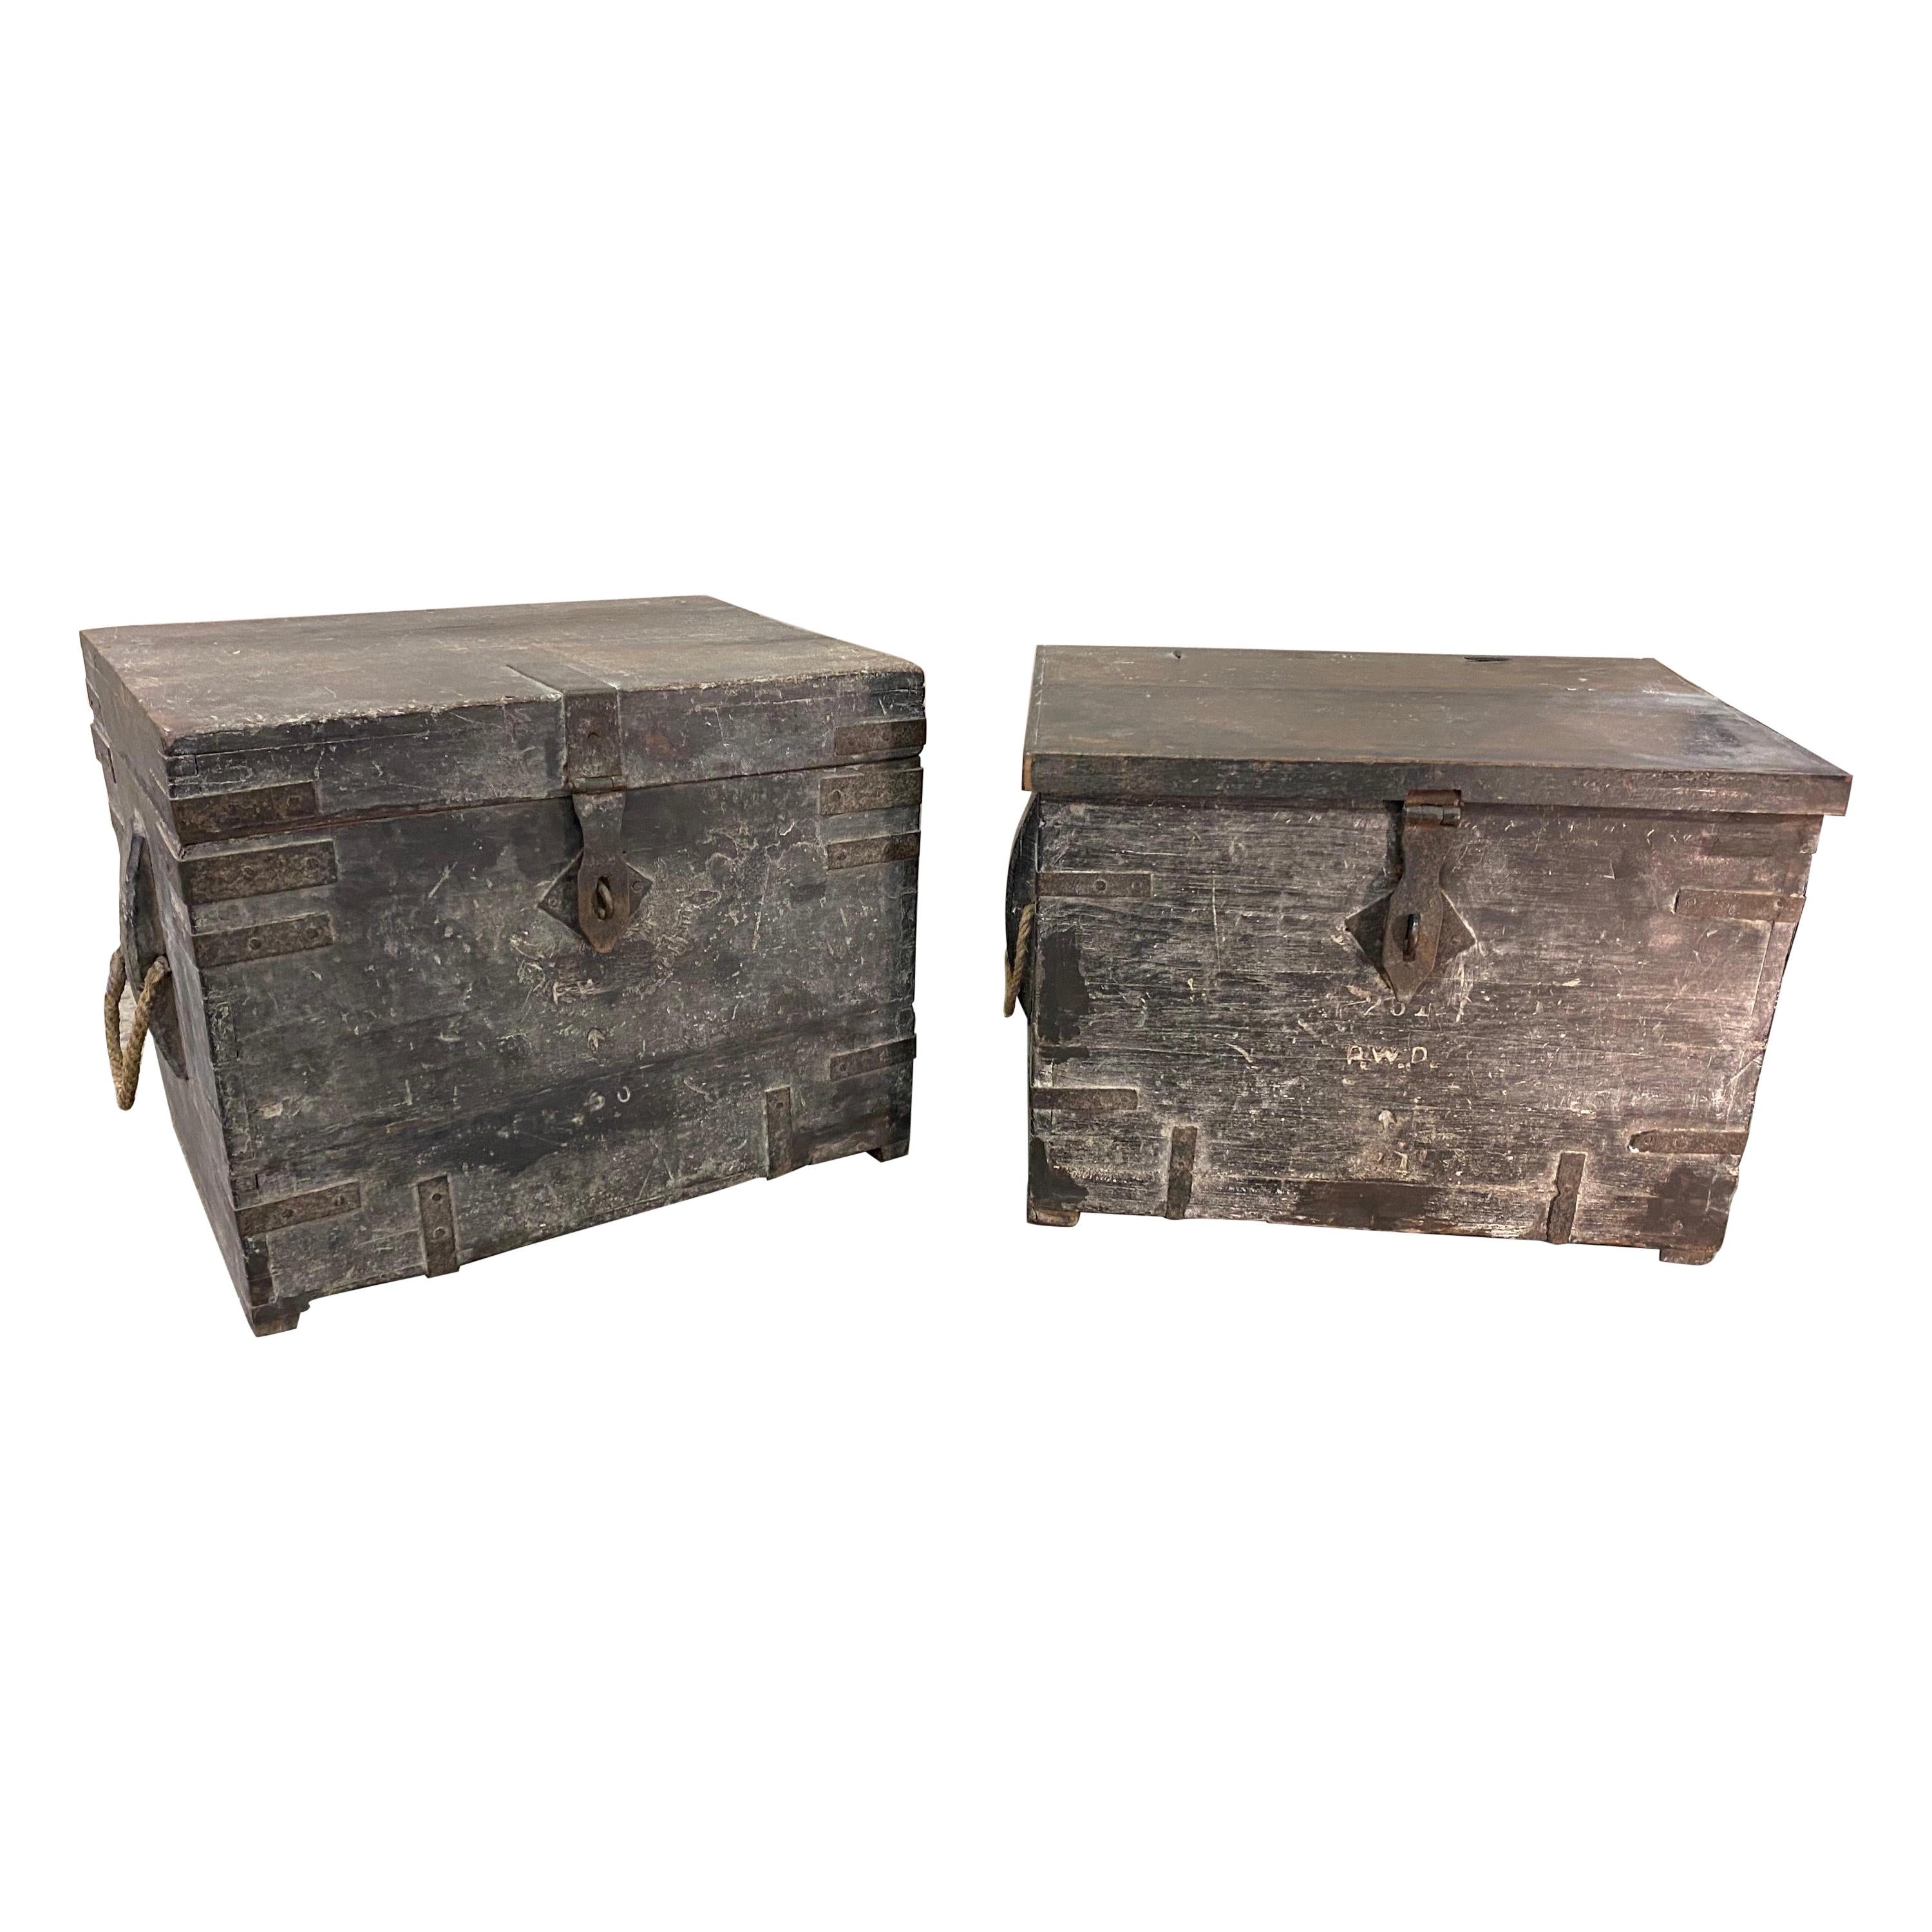 Near Pair of 19th Century British Colonial Teak Munitions Trunks as Side Tables